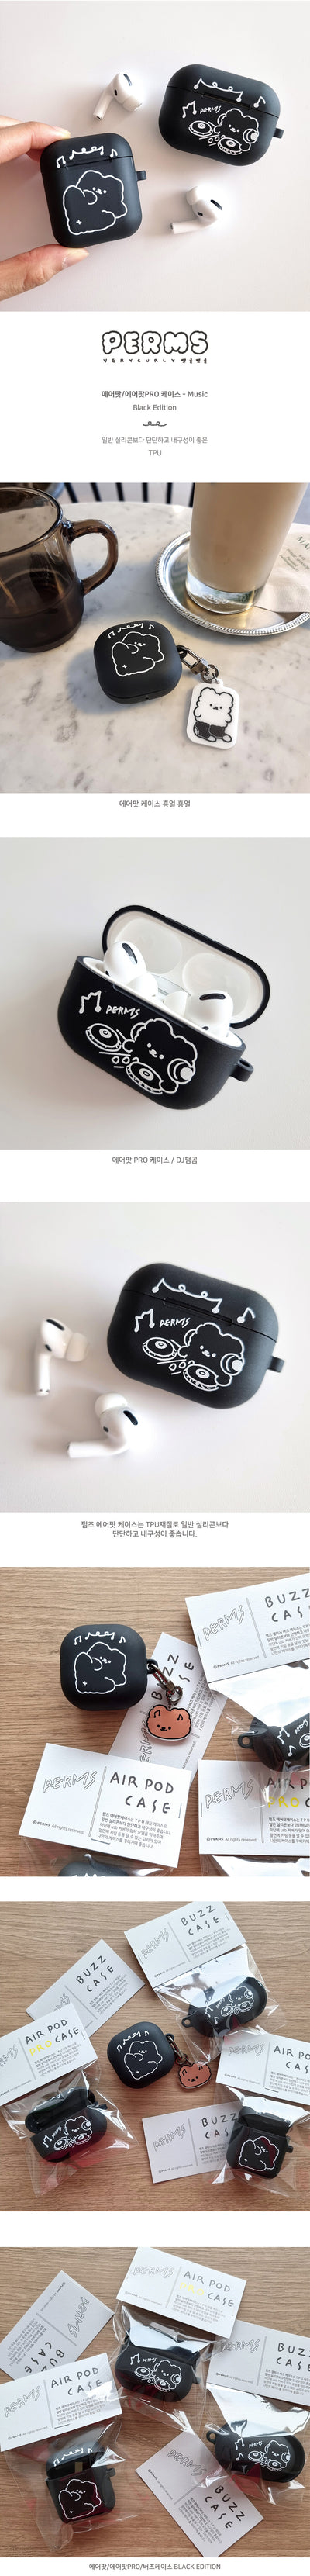 AirPods/AirPods Proケース_Music